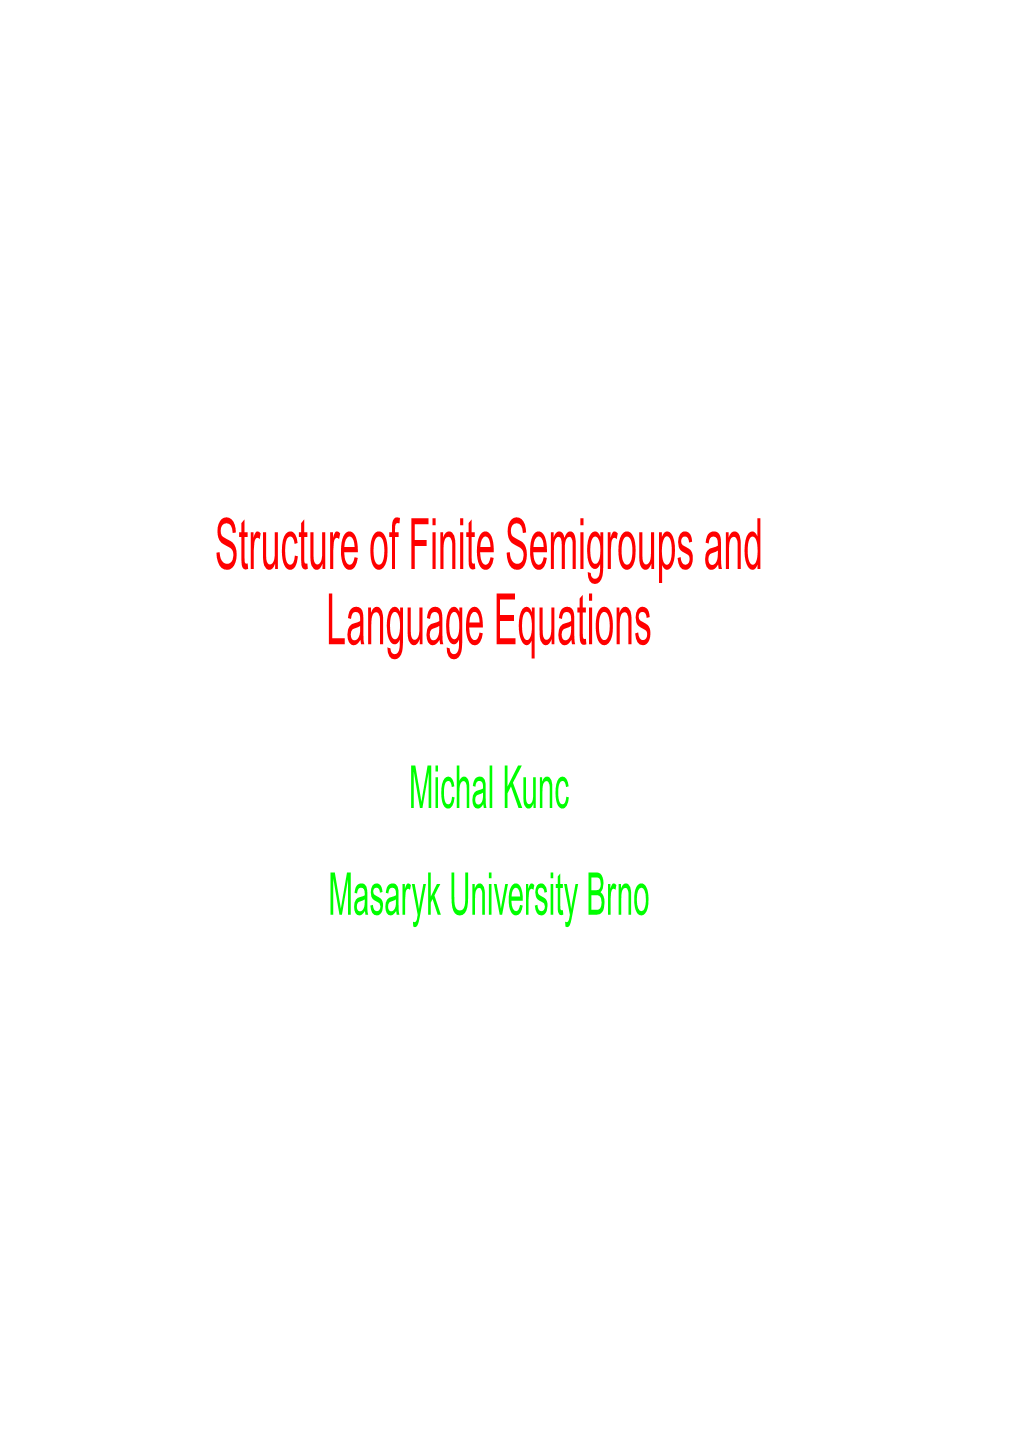 Structure of Finite Semigroups and Language Equations